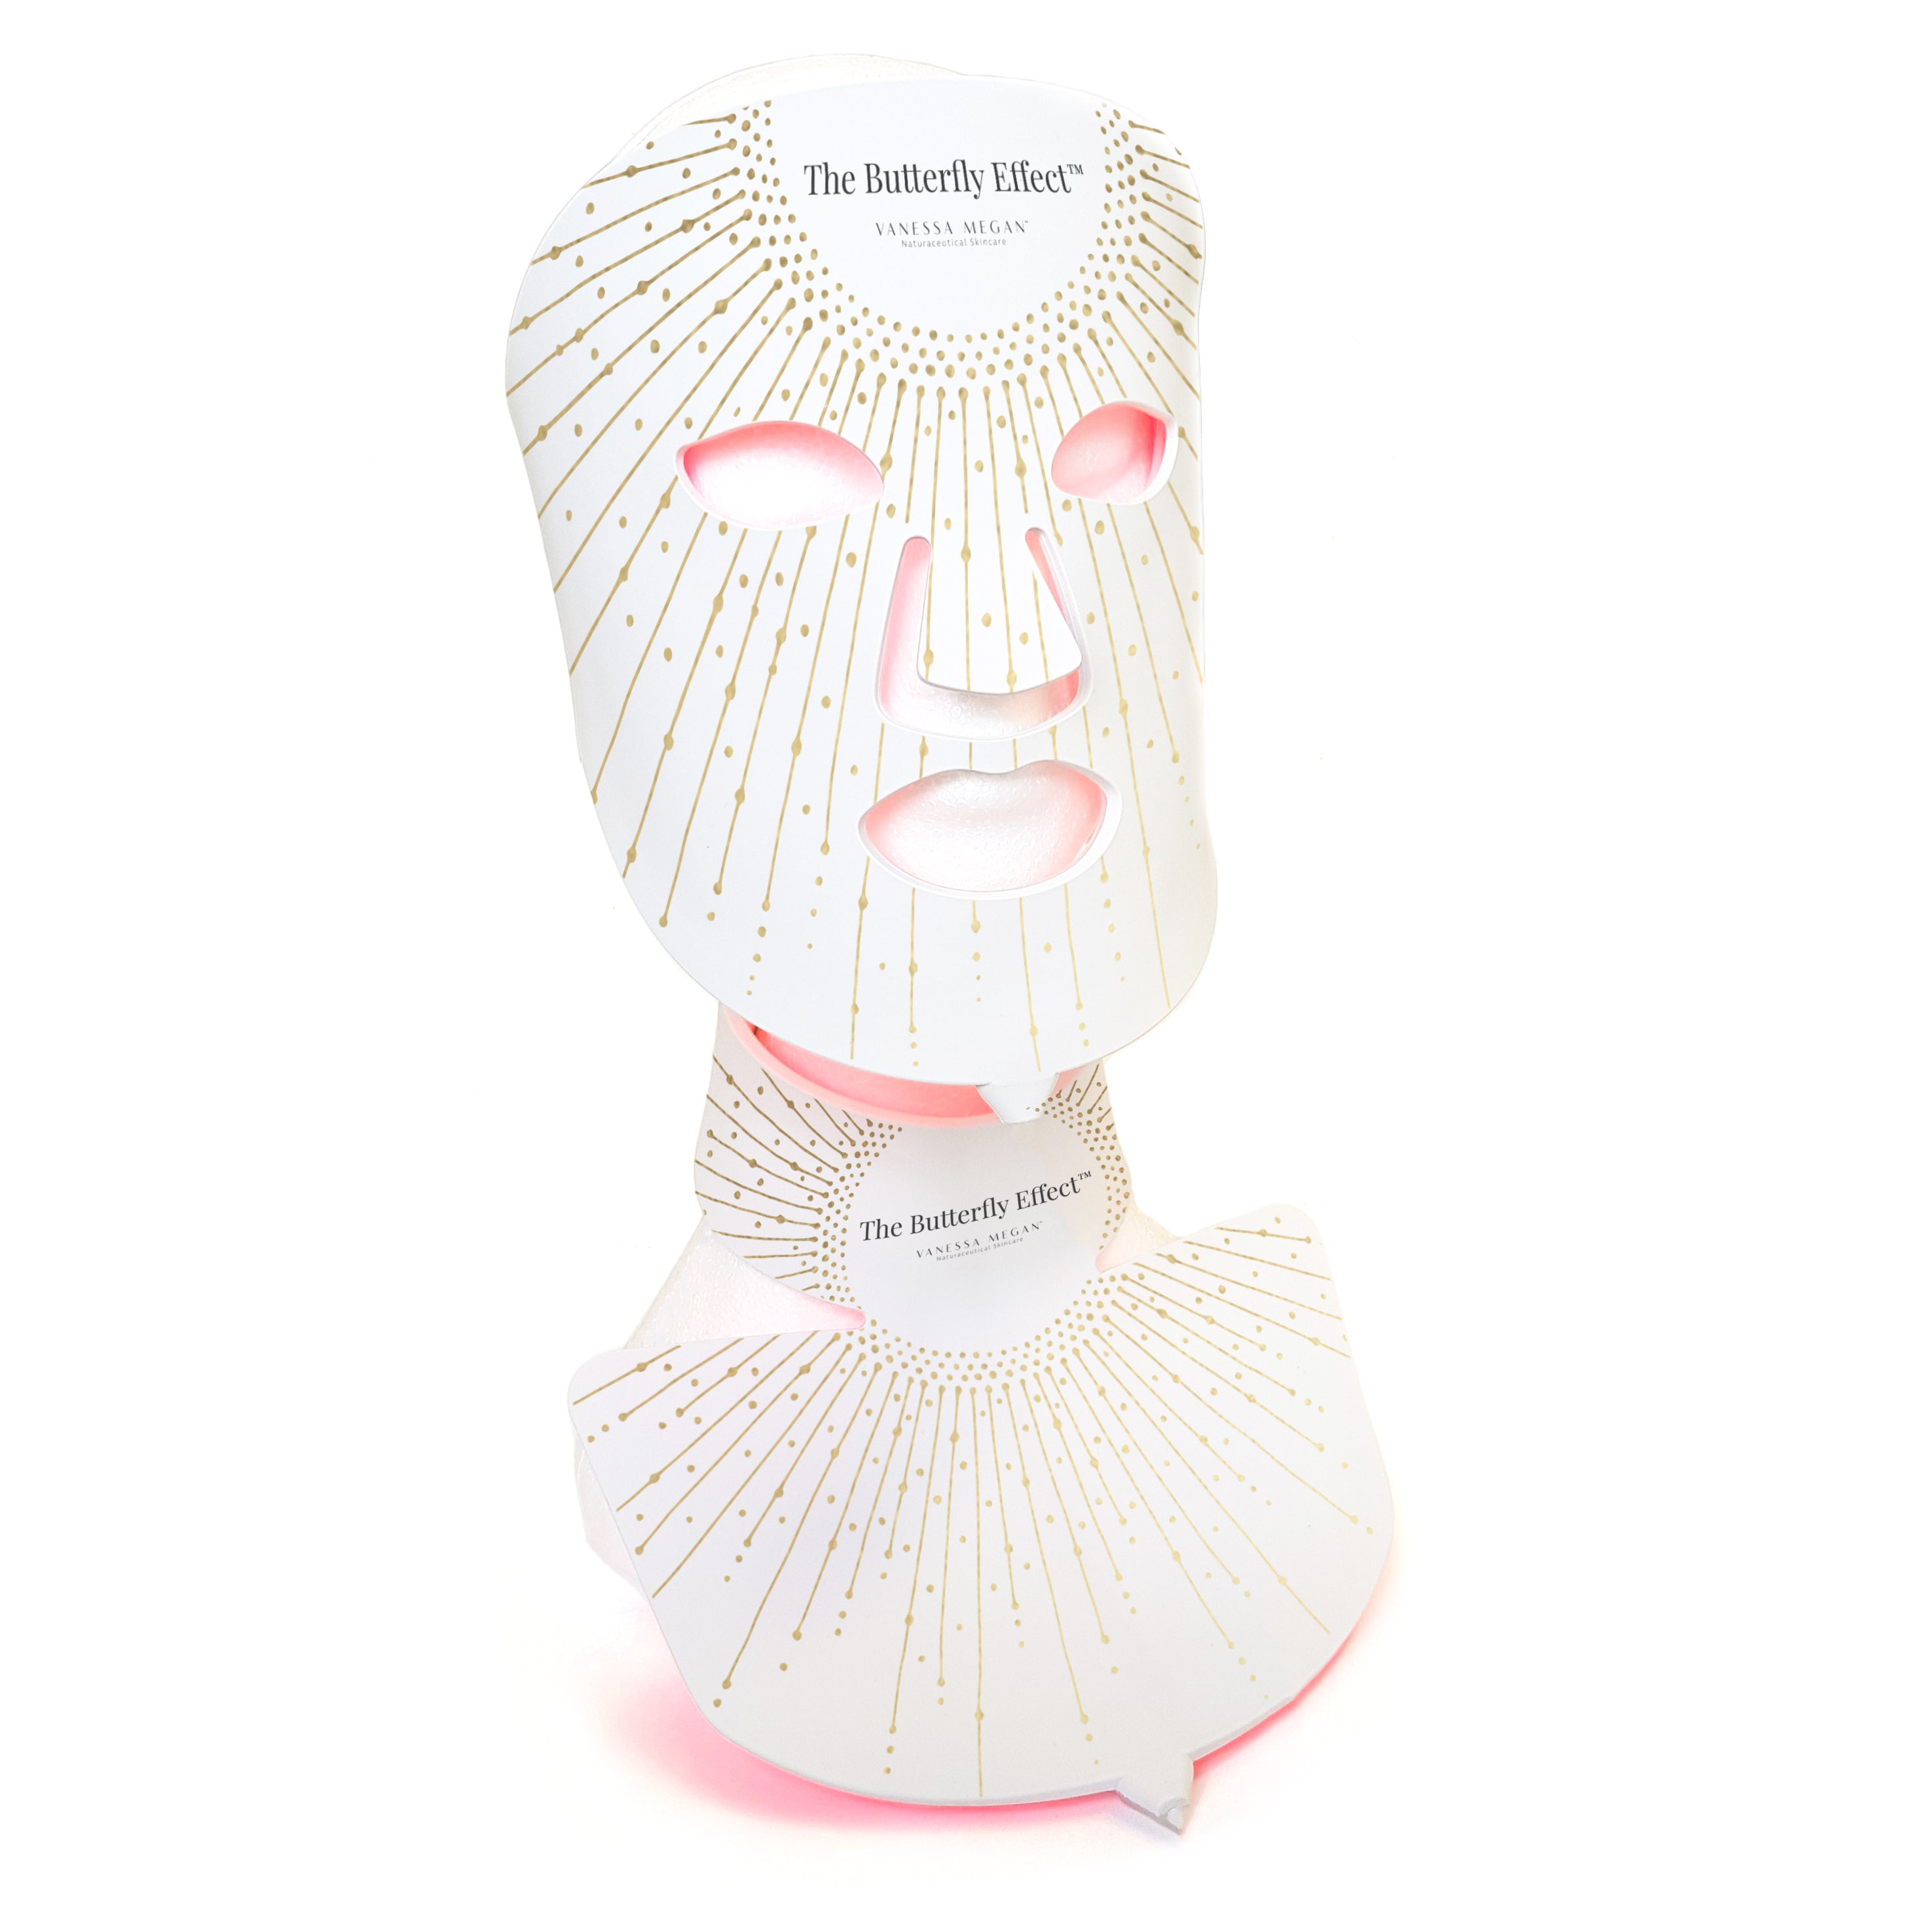 The Butterfly Effect™ Medical-Grade Silicone LED Mask